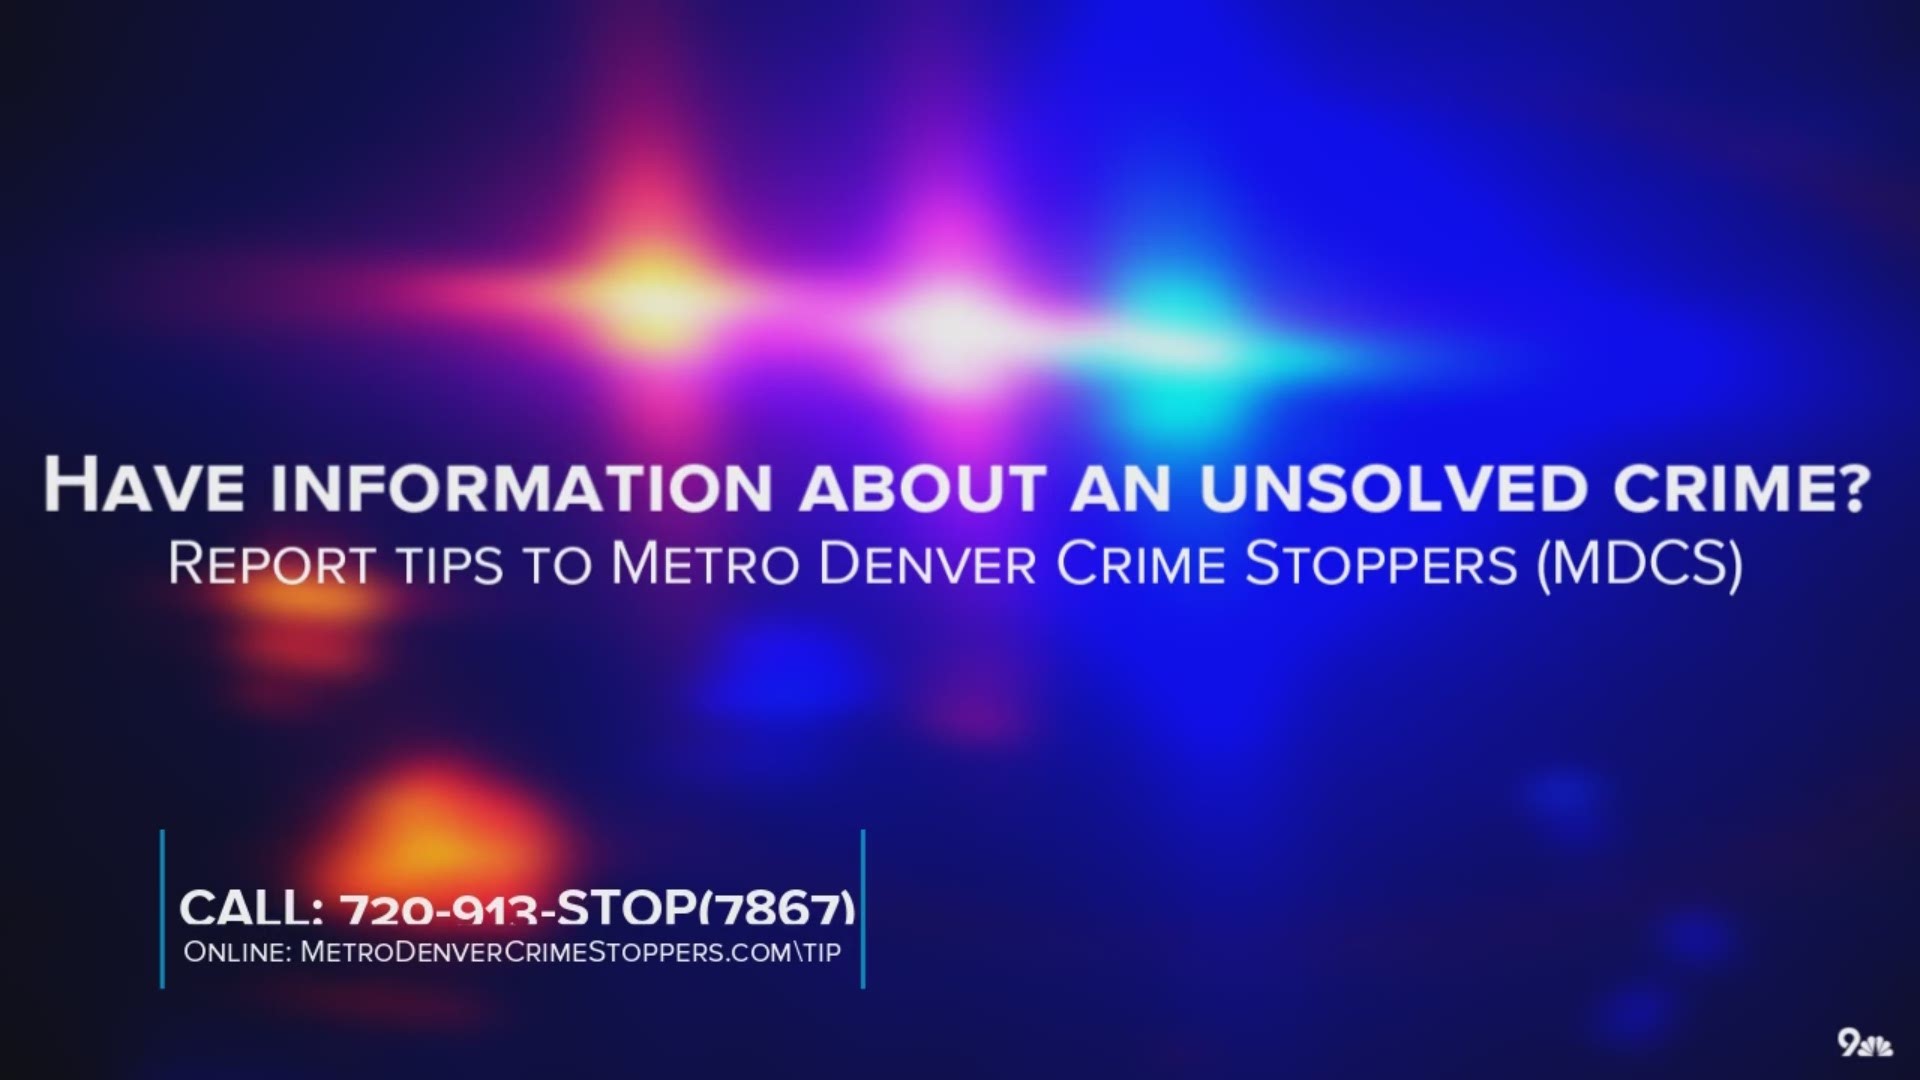 How to report tips to Denver Metro Crime Stoppers and how it works